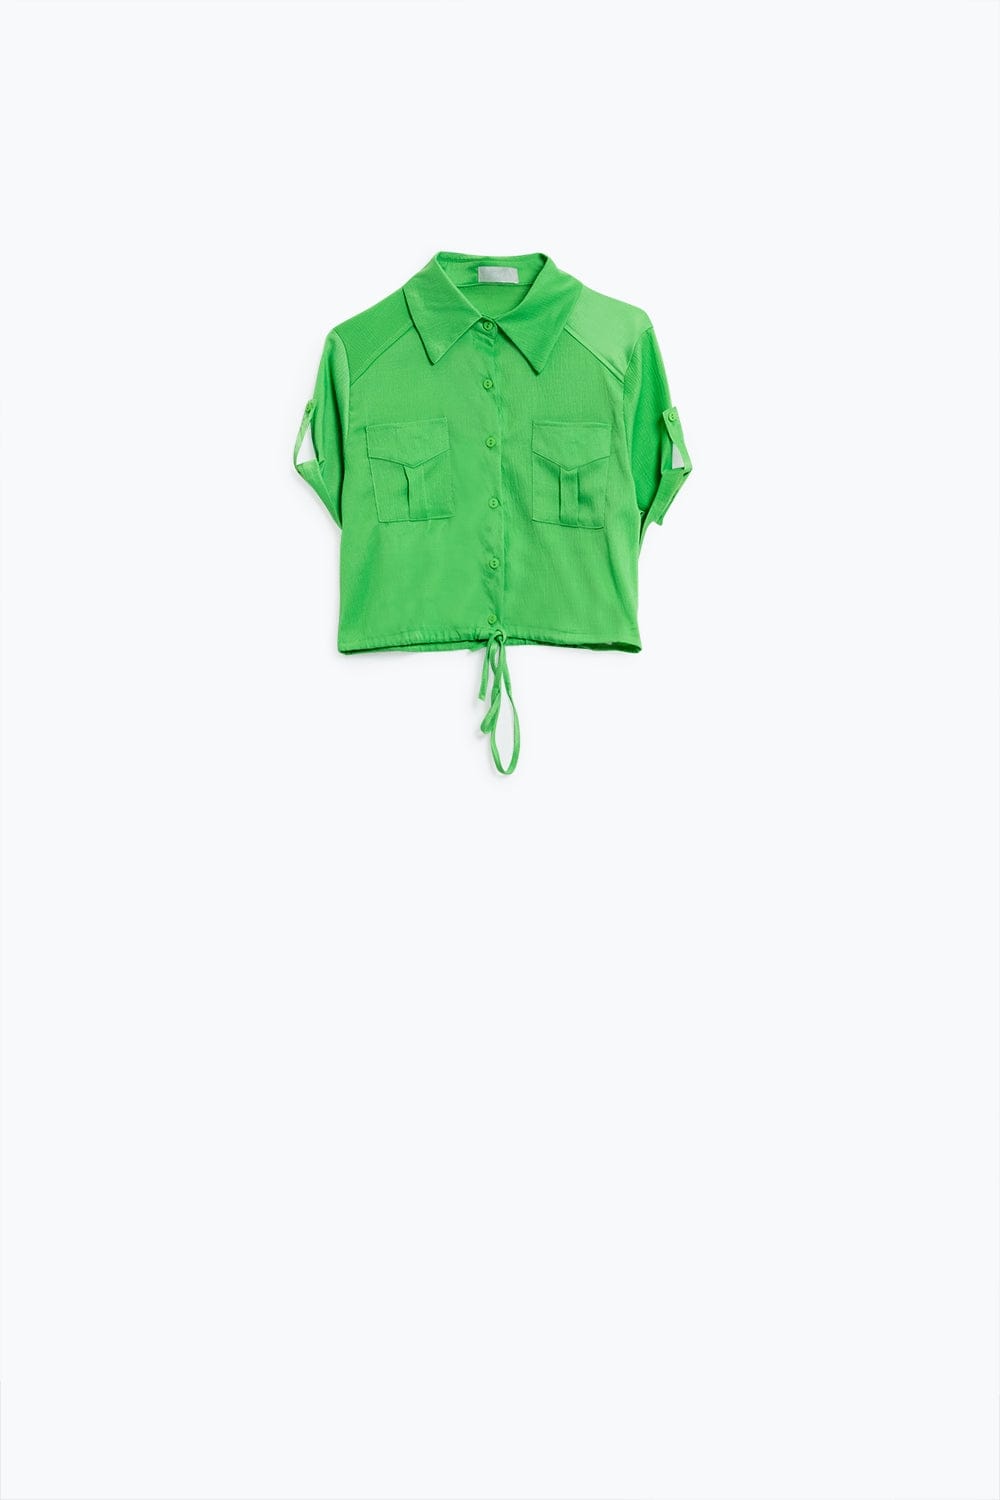 Q2 Women's Blouse Green Short Satin Blouse With Chest Pockets And Drawstrings At Bottom